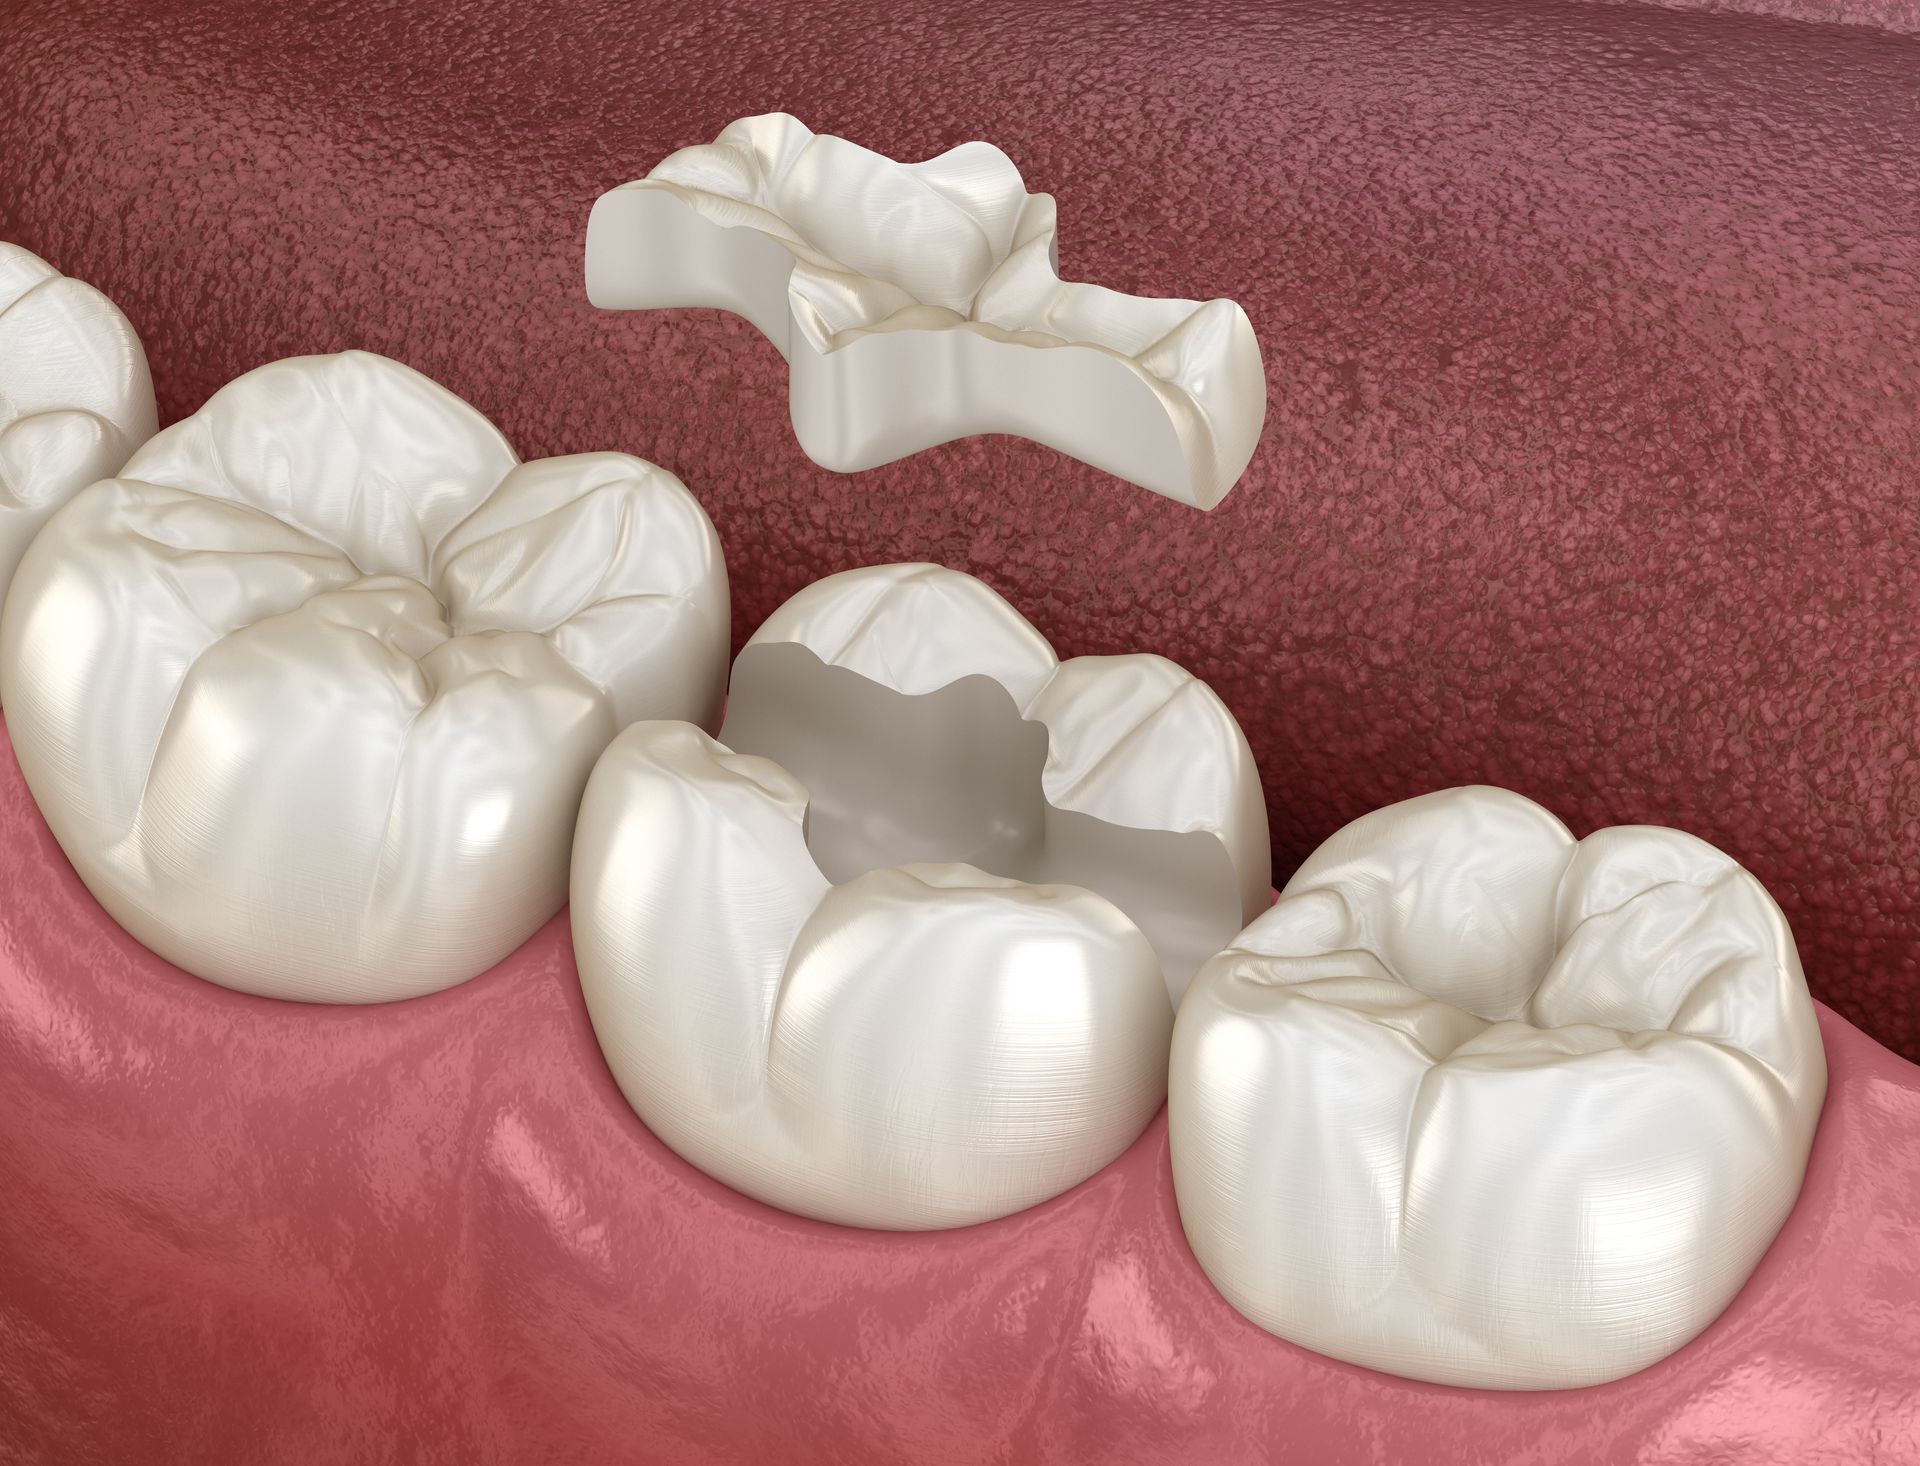 Inlays and Onlays: A Conservative Approach to Restoring Teeth